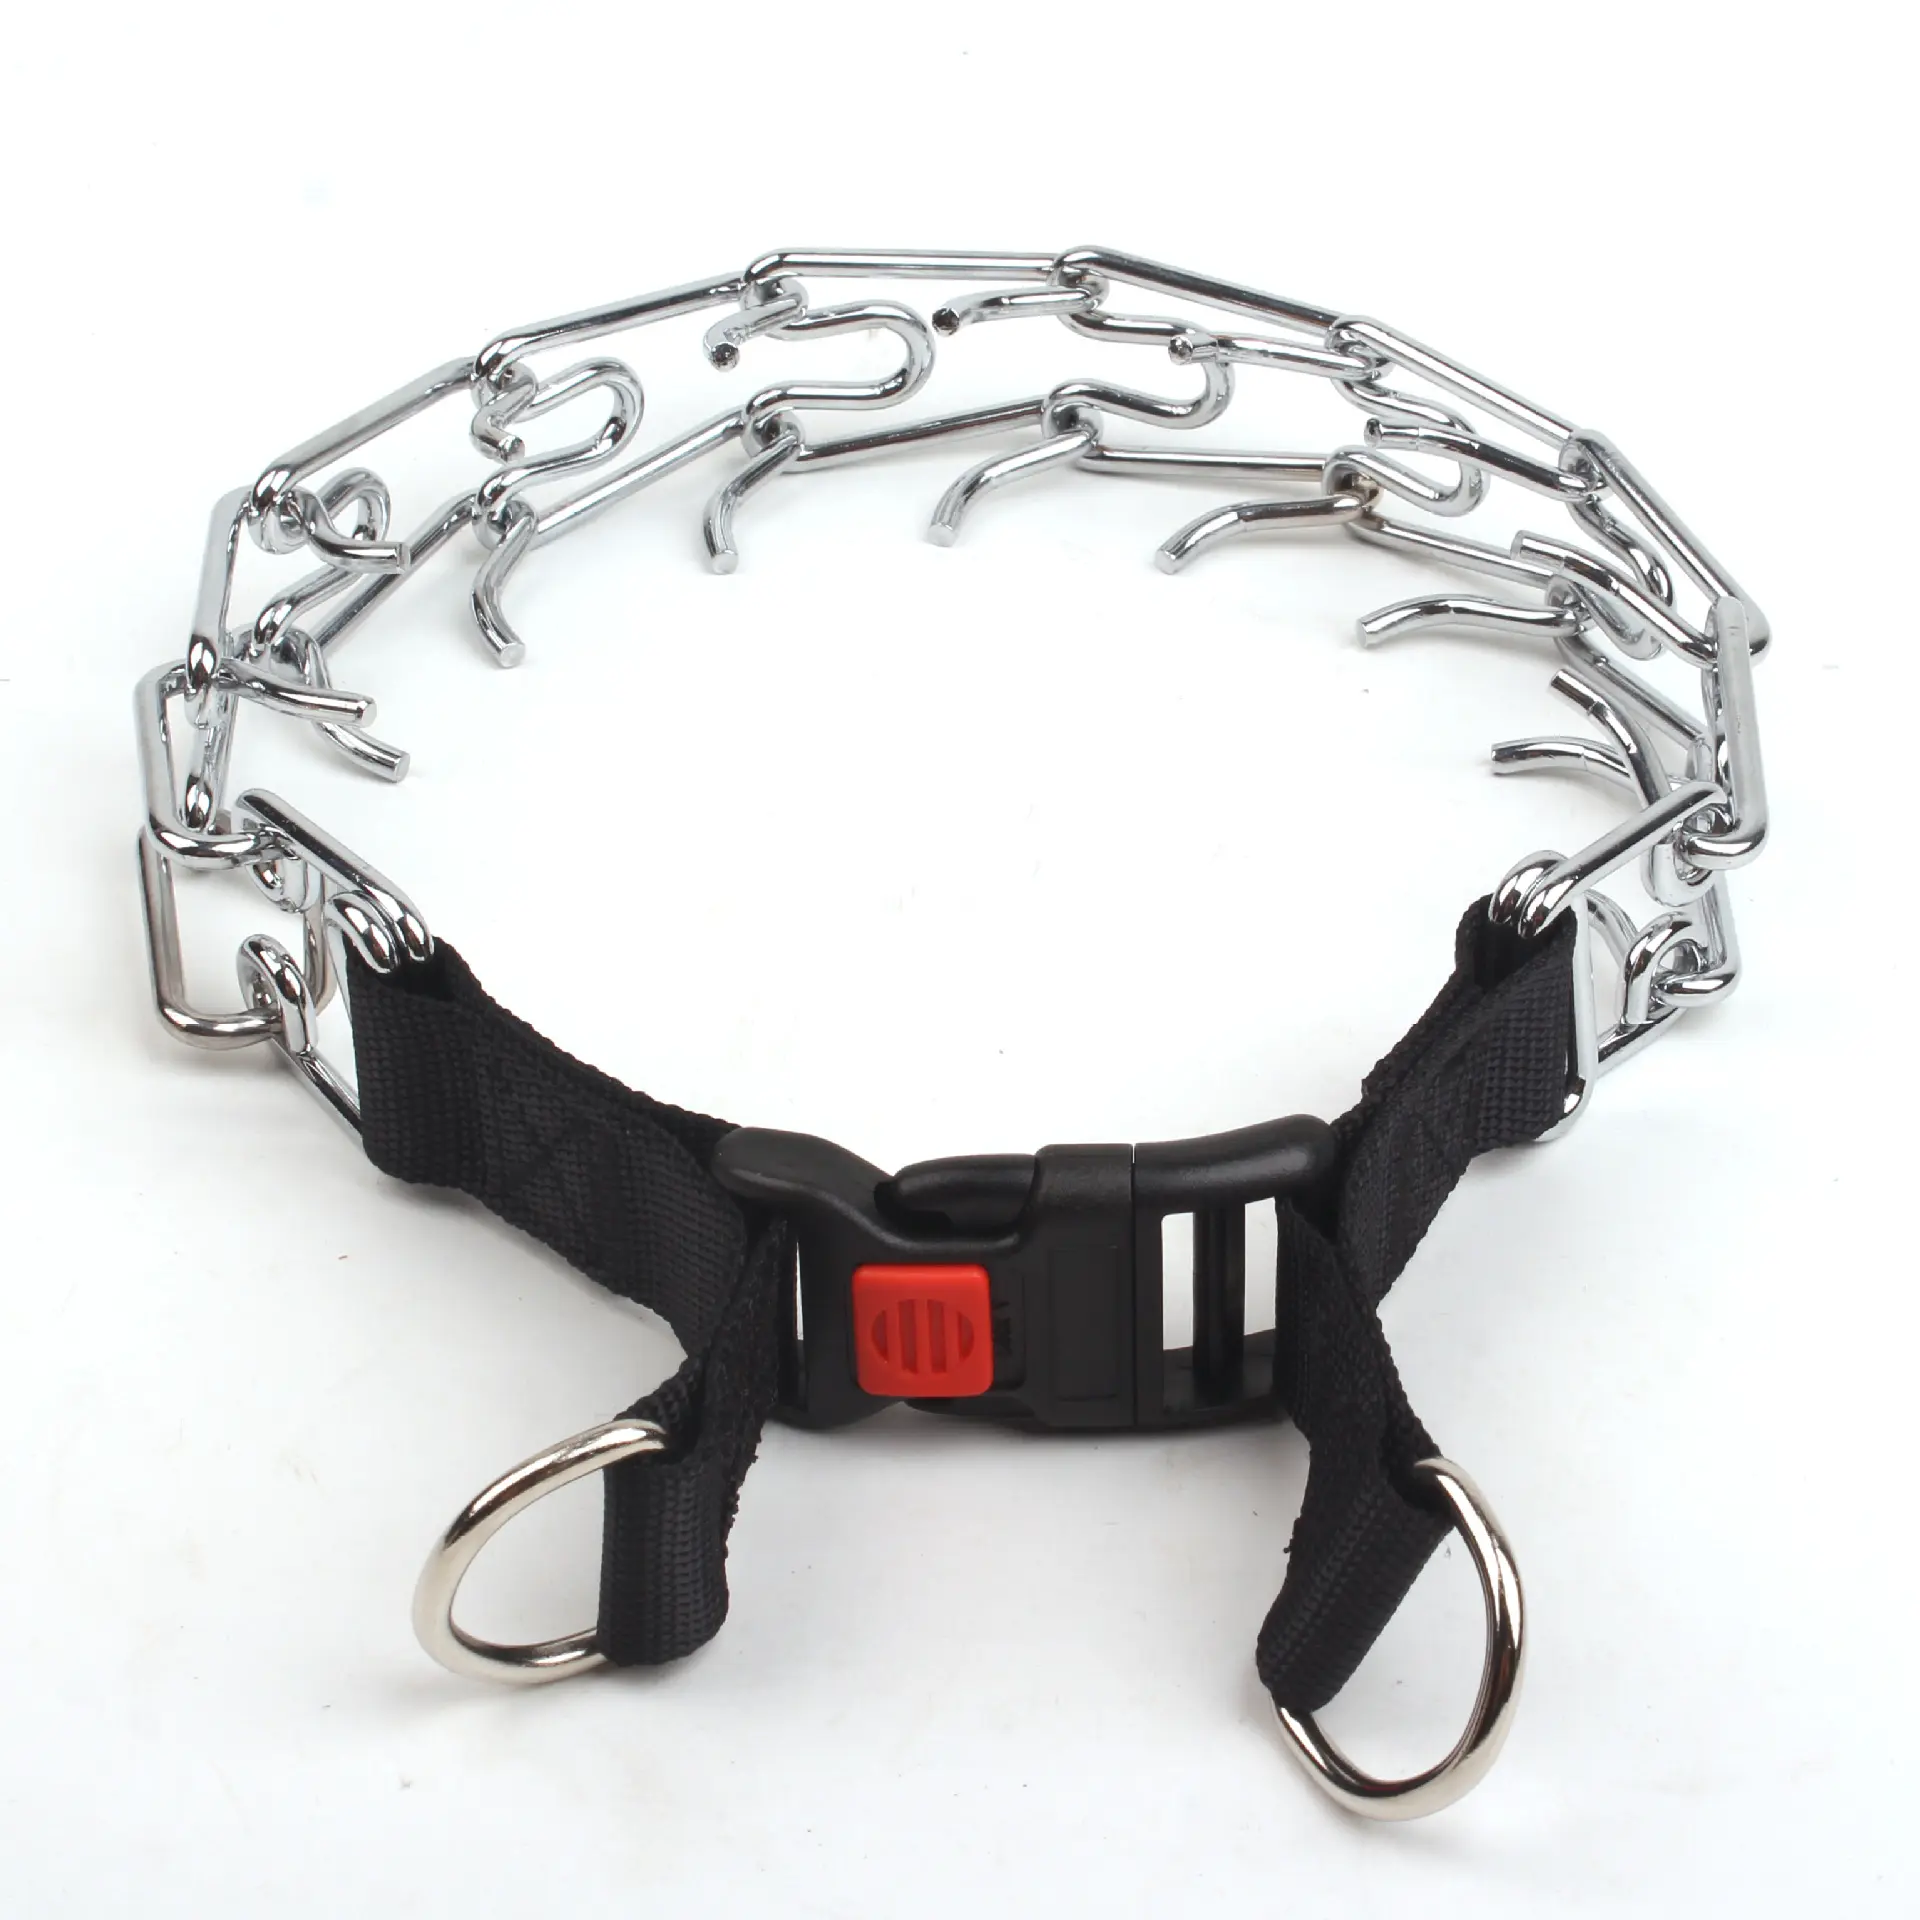 New High Quality Adjustable Stainless Steel Chain Dog Collar Outdoor Training Prong Collar For Dogs